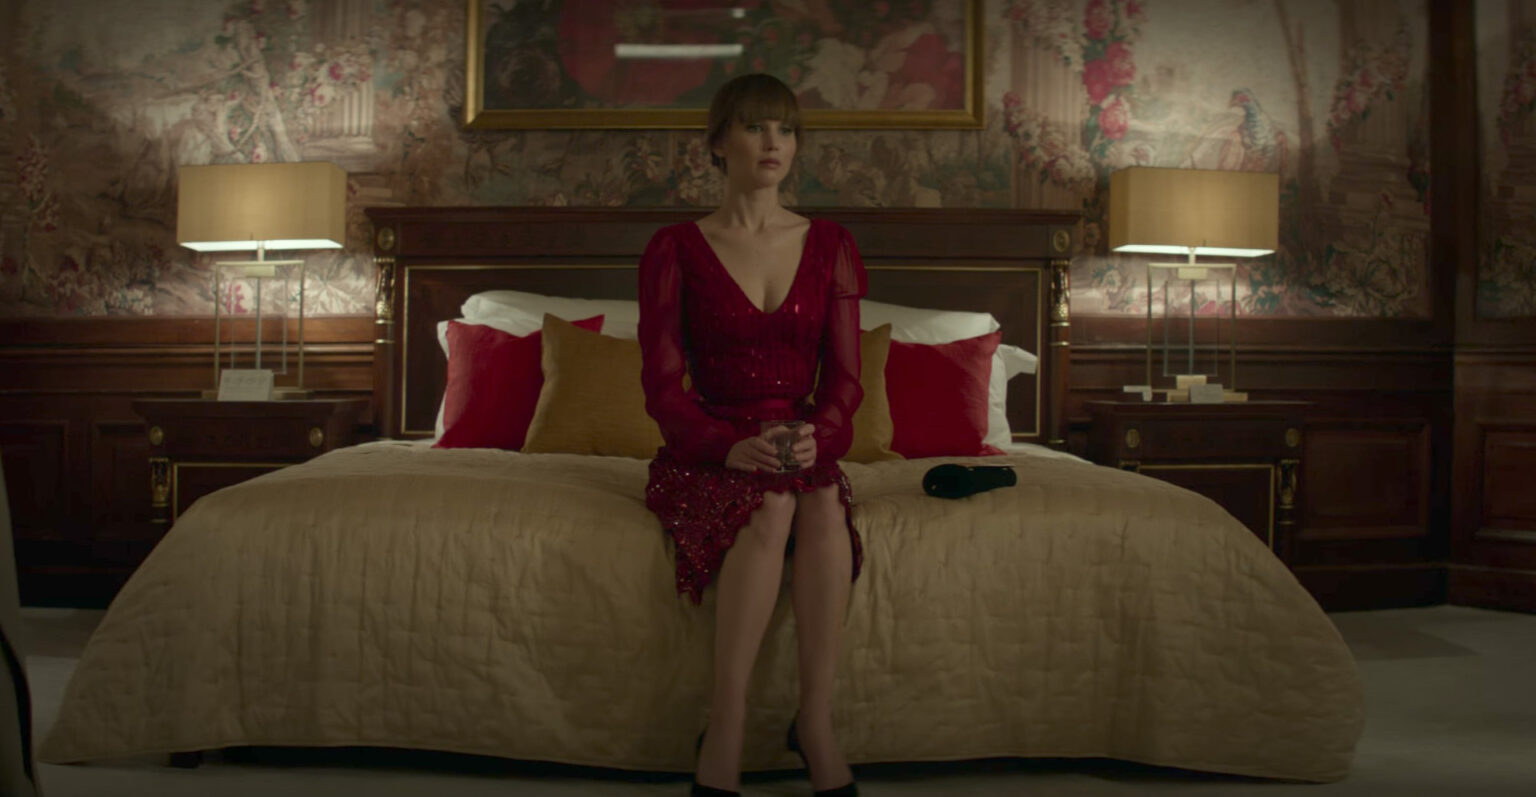 'Red Sparrow' starring Jennifer Lawrence is a spy drama with several sex scenes, but they're not precisely enjoyable. Here's all you need to know.